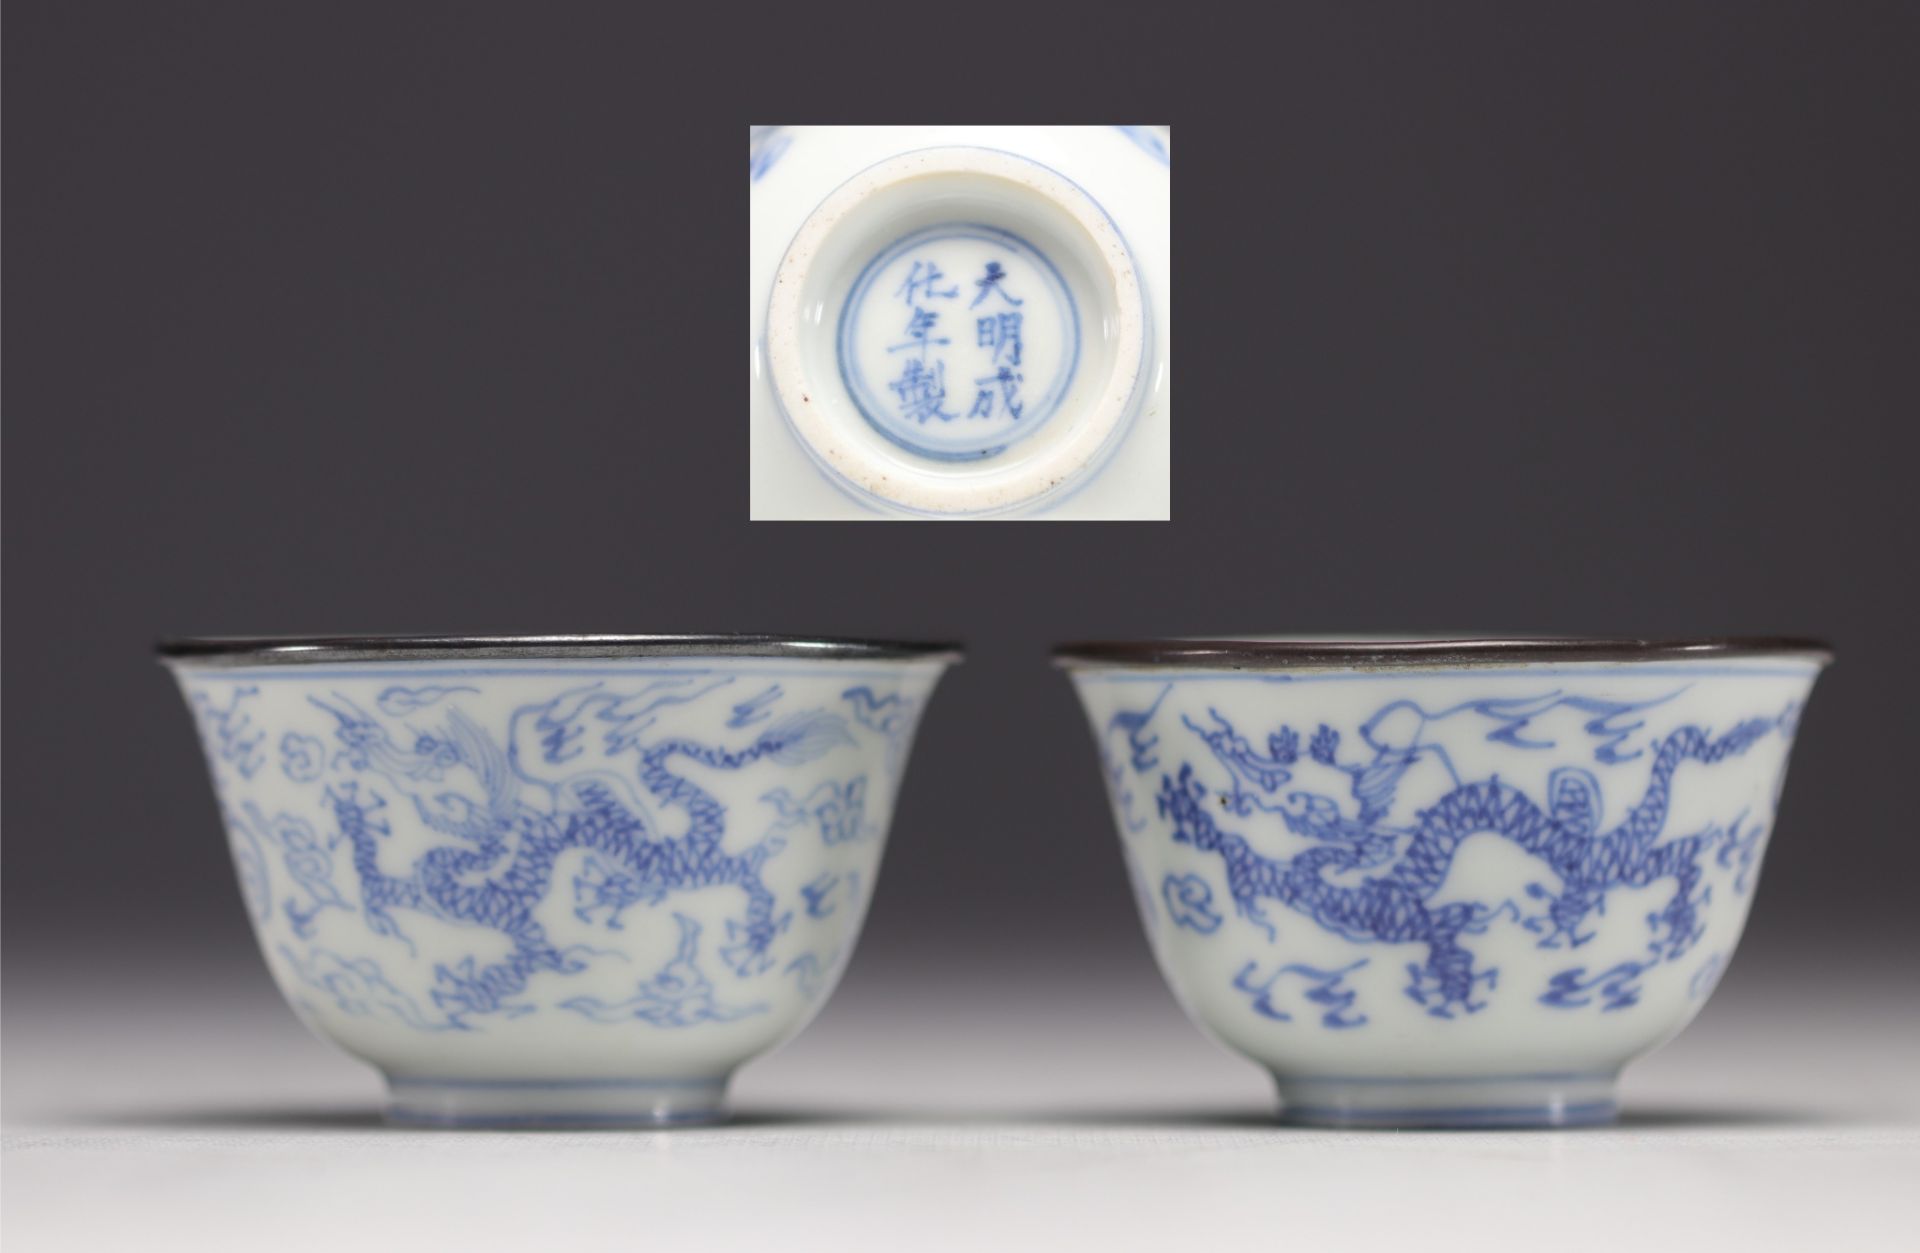 China - Pair of small Ming Imperial bowls in blue and white porcelain decorated with dragons